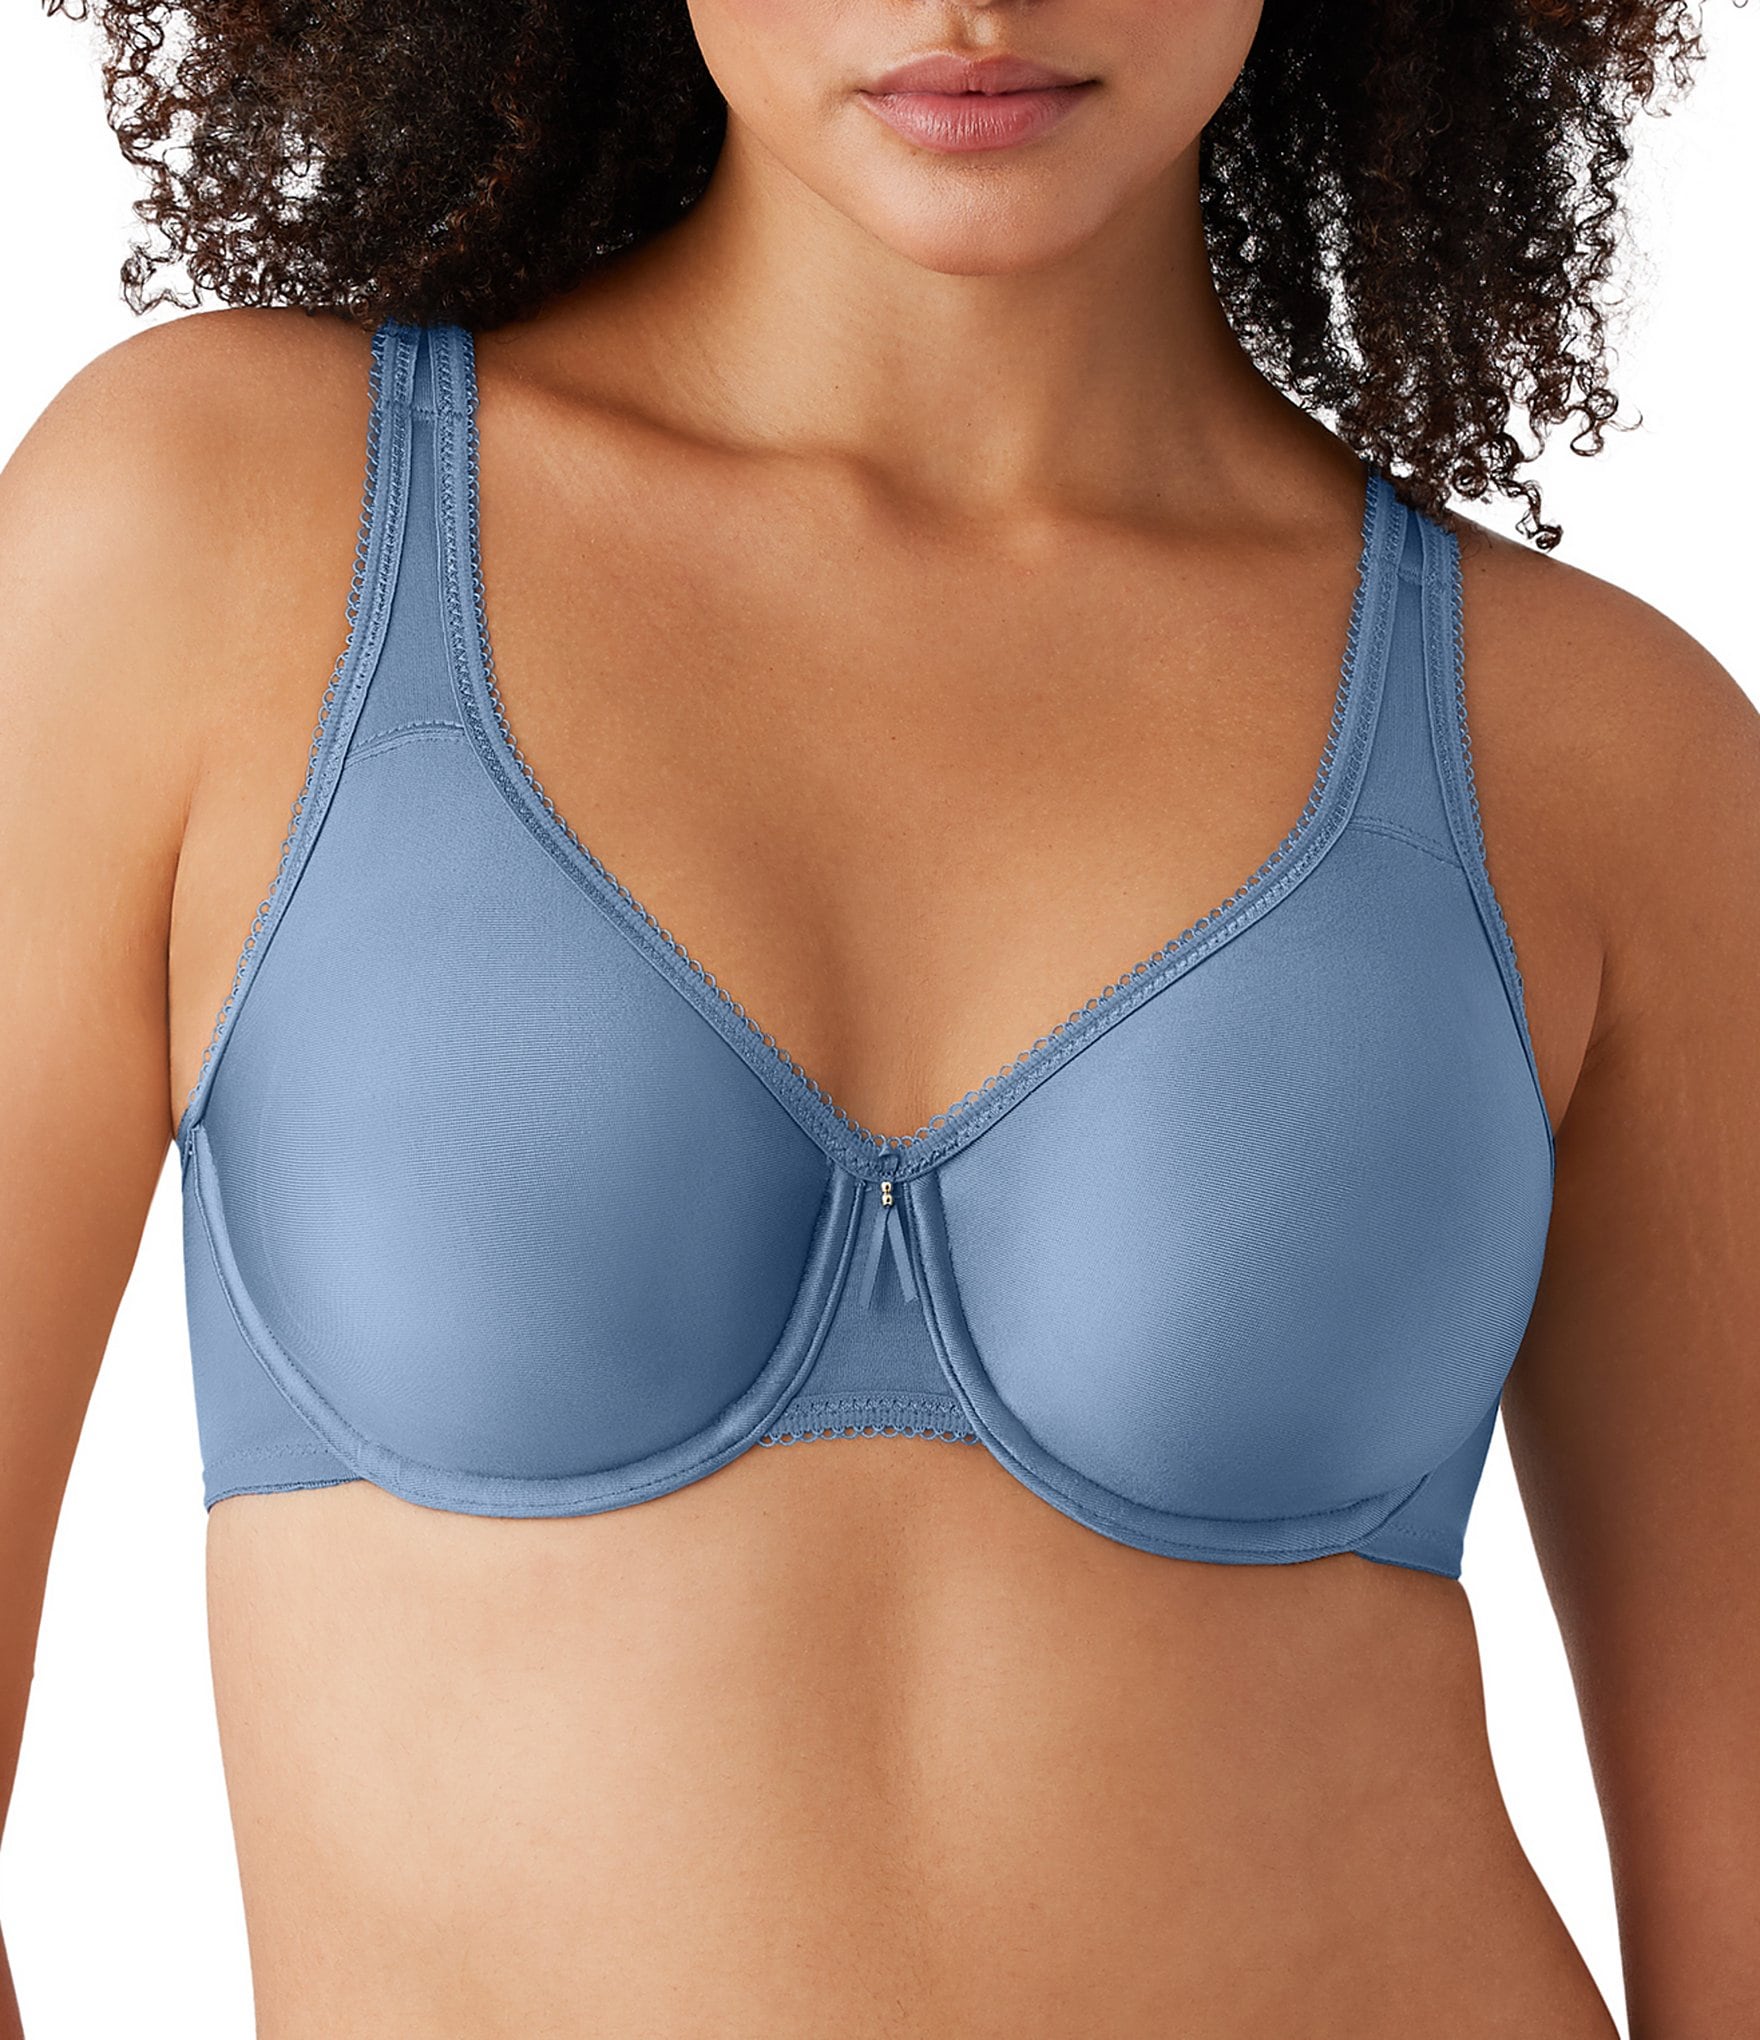 Blue One Size Band A Bras & Bra Sets for Women for sale